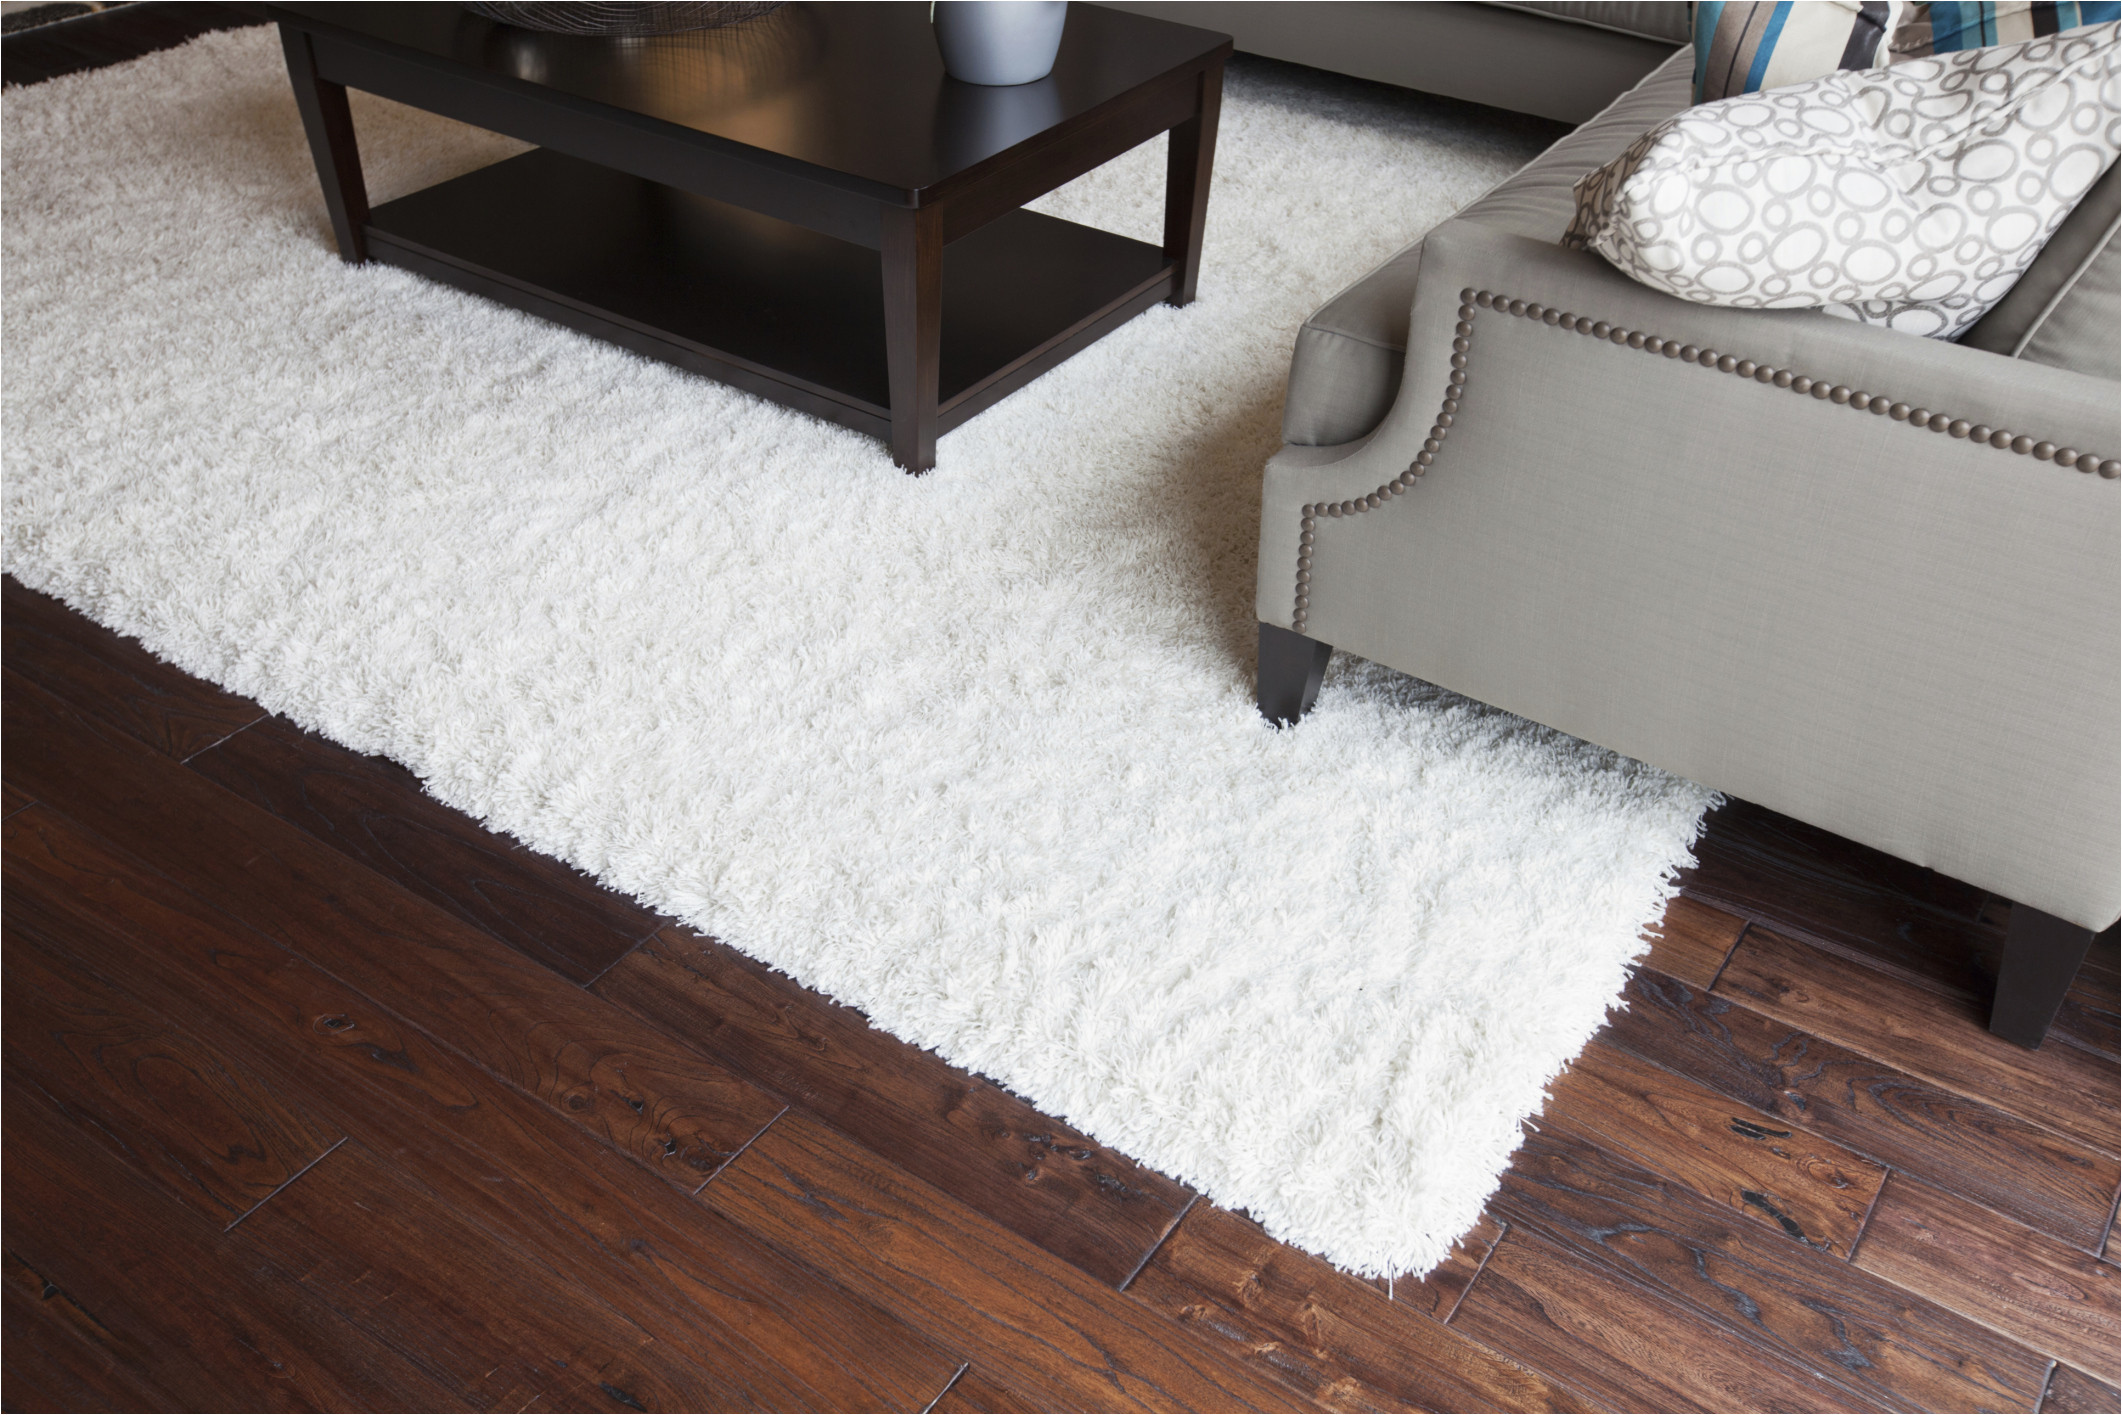 Can You Clean area Rugs On Hardwood Floors How to Clean An area Rug On A Hardwood Floor Kiwi Services